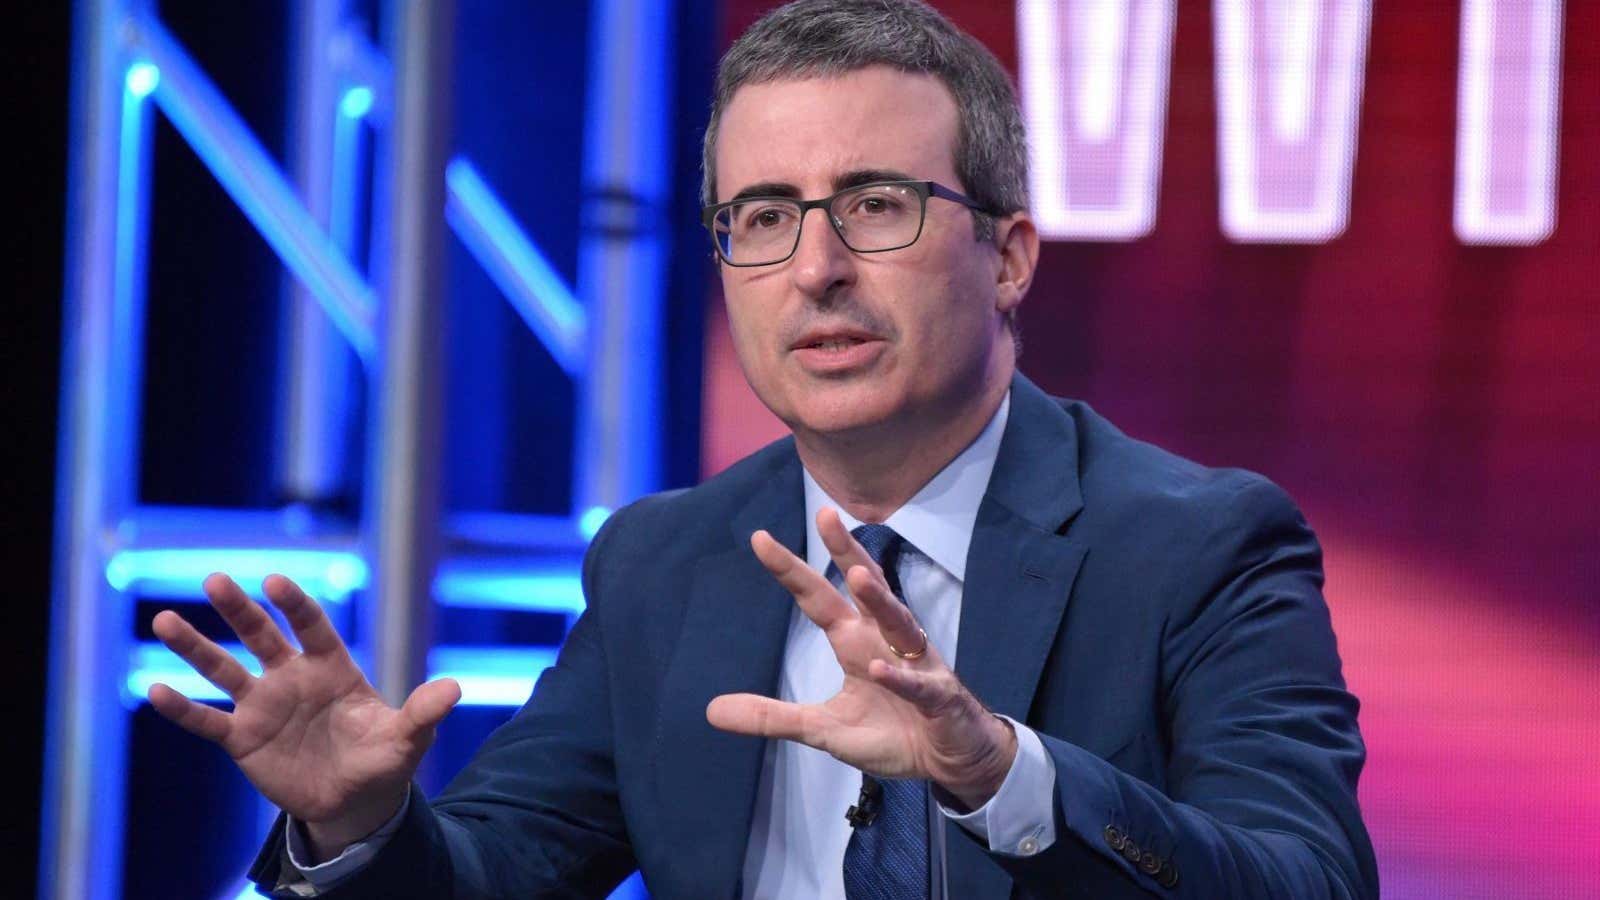 John Oliver wasn’t always so ready to speak out about sexual harassment.